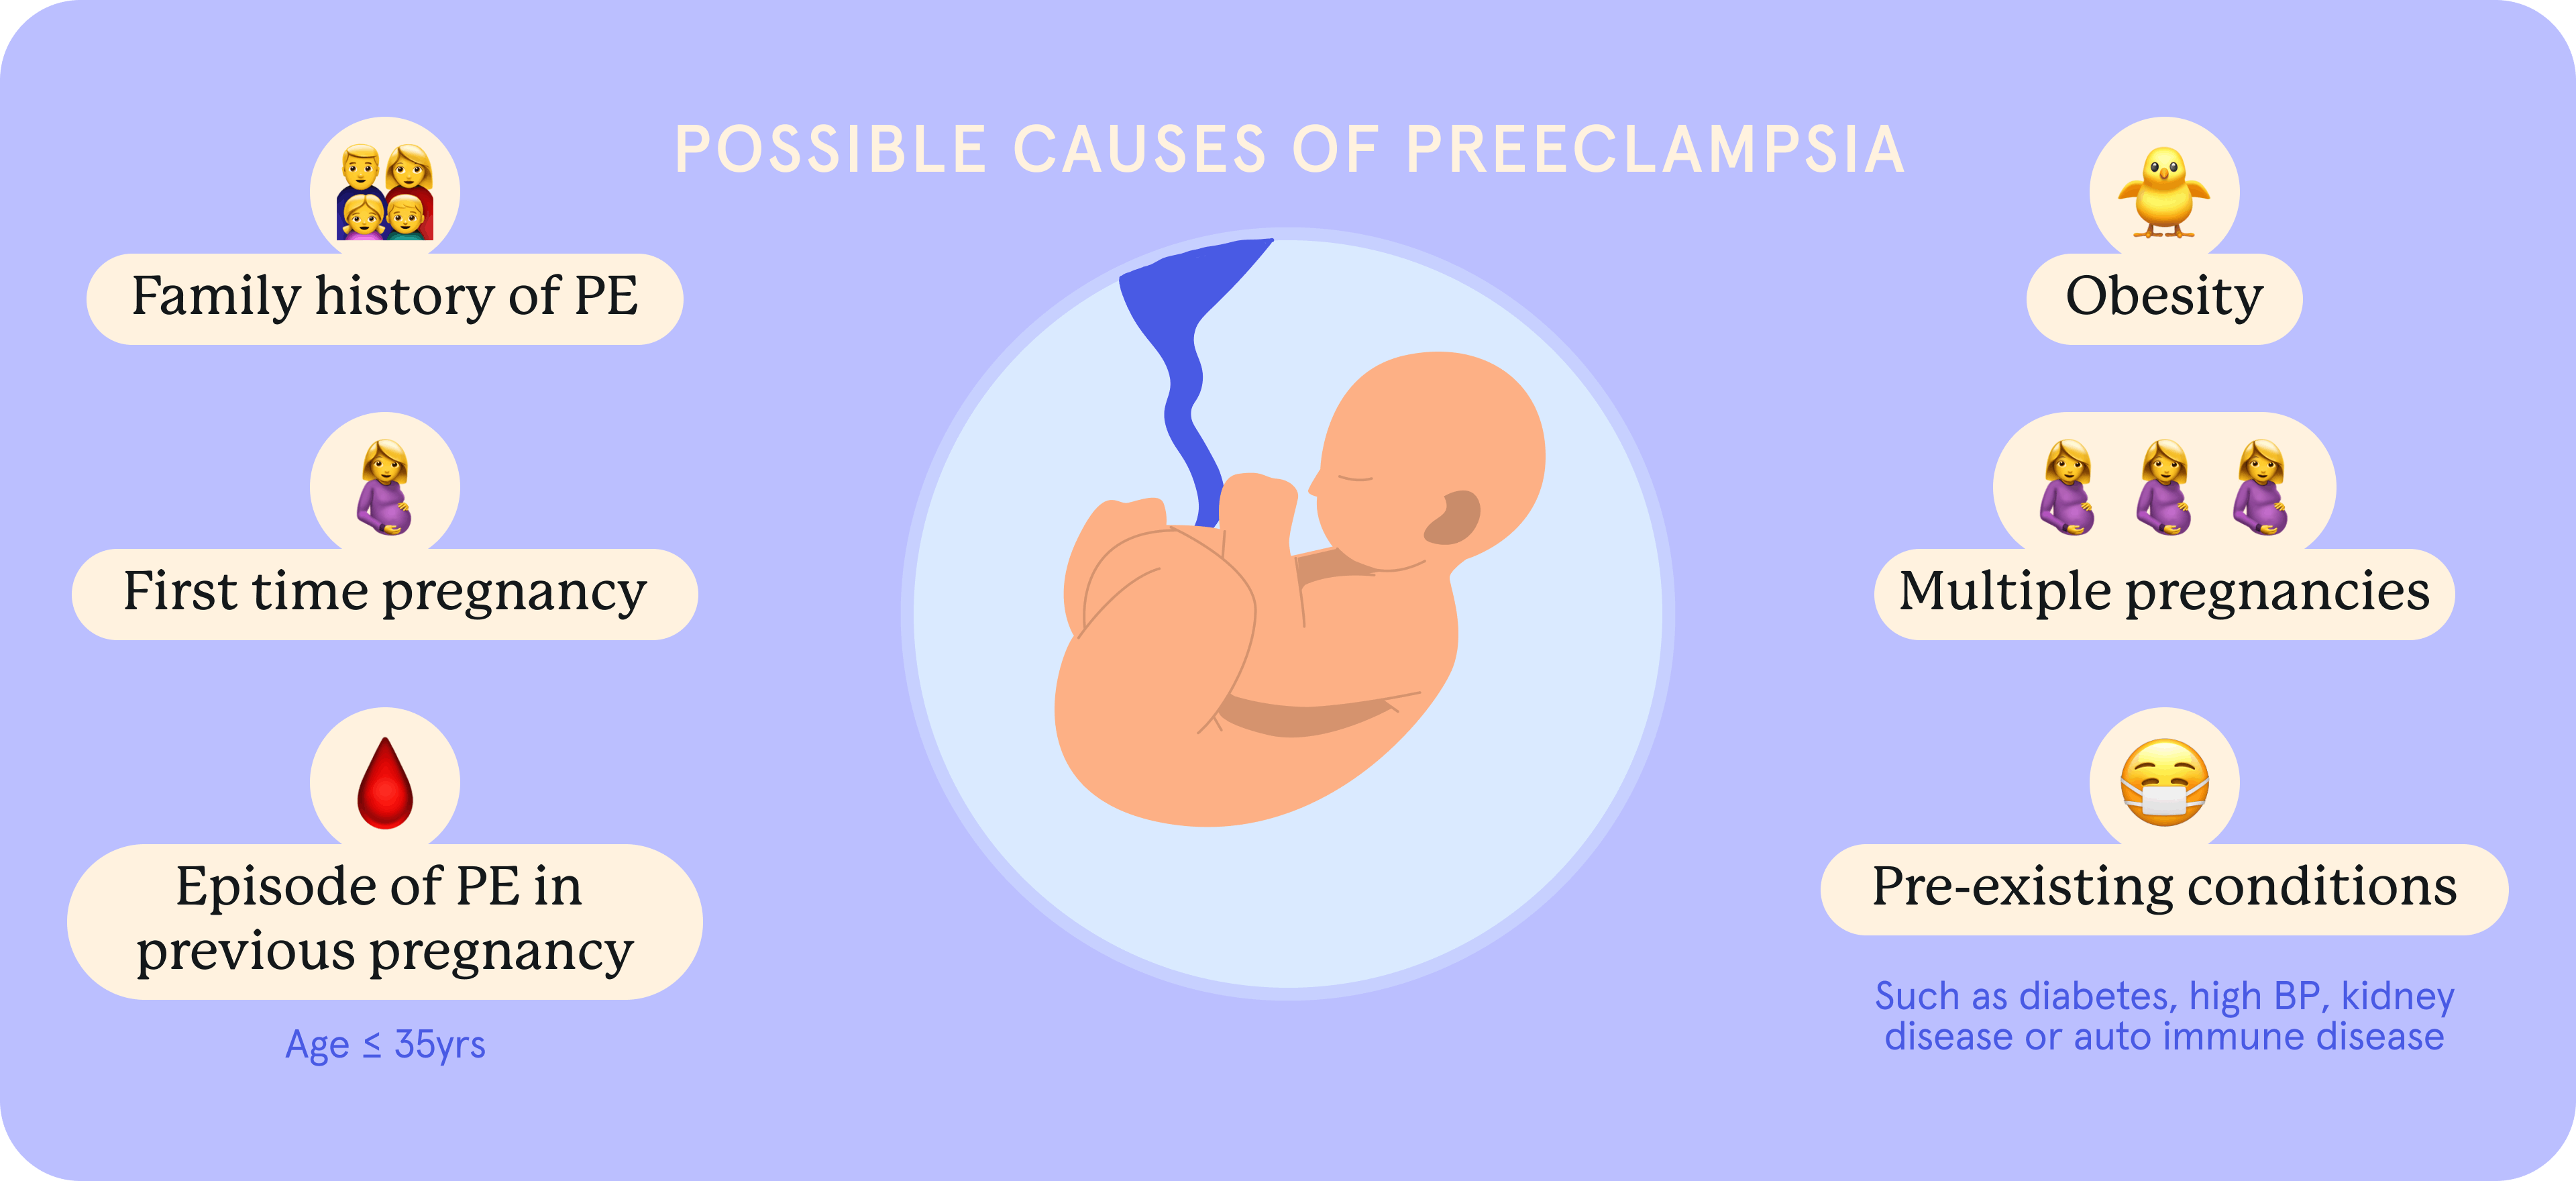 Possible causes of Preeclampsia